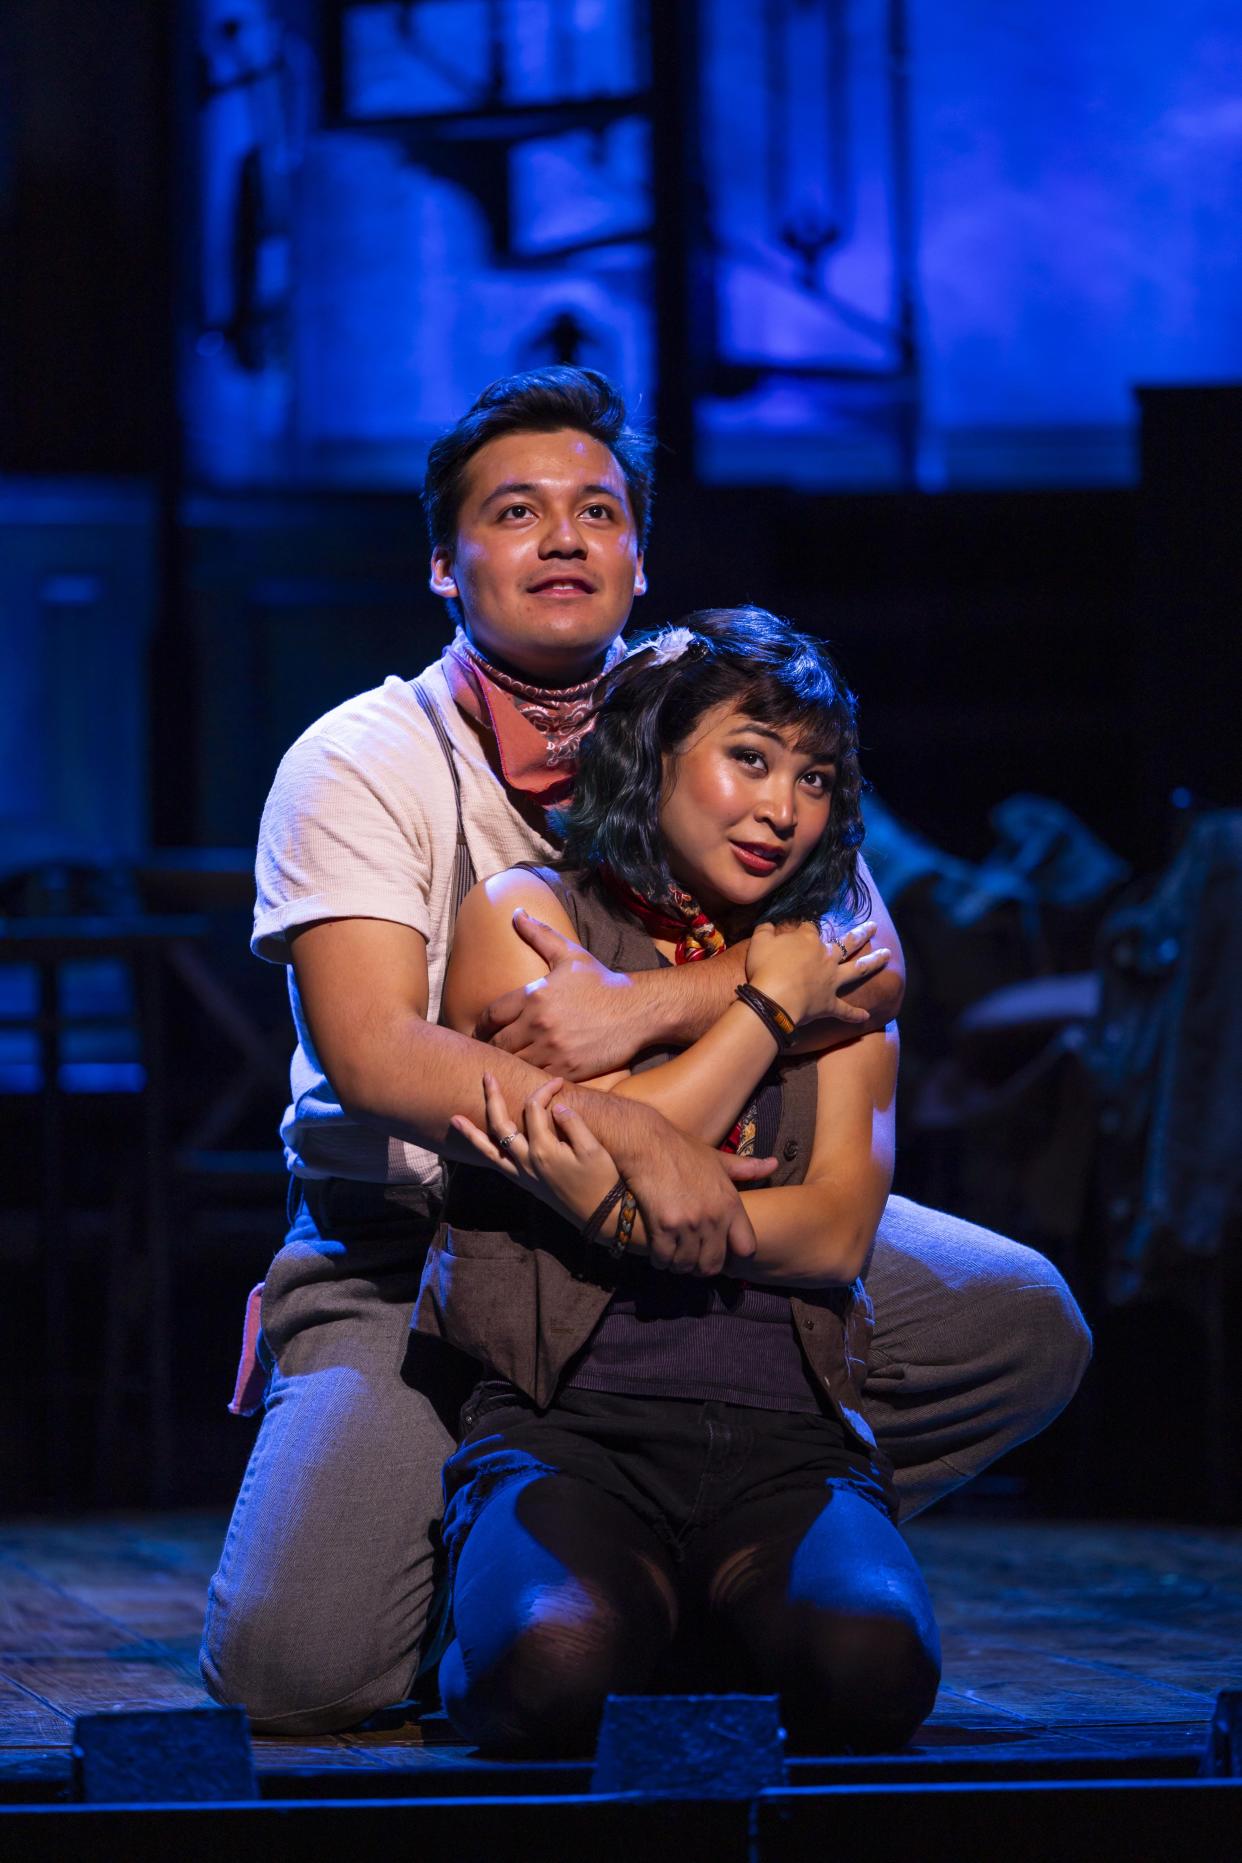 J. Antonio Rodriguez and Amaya Braganza play the lovers Orpheus and Eurydice in the touring musical “Hadestown.”